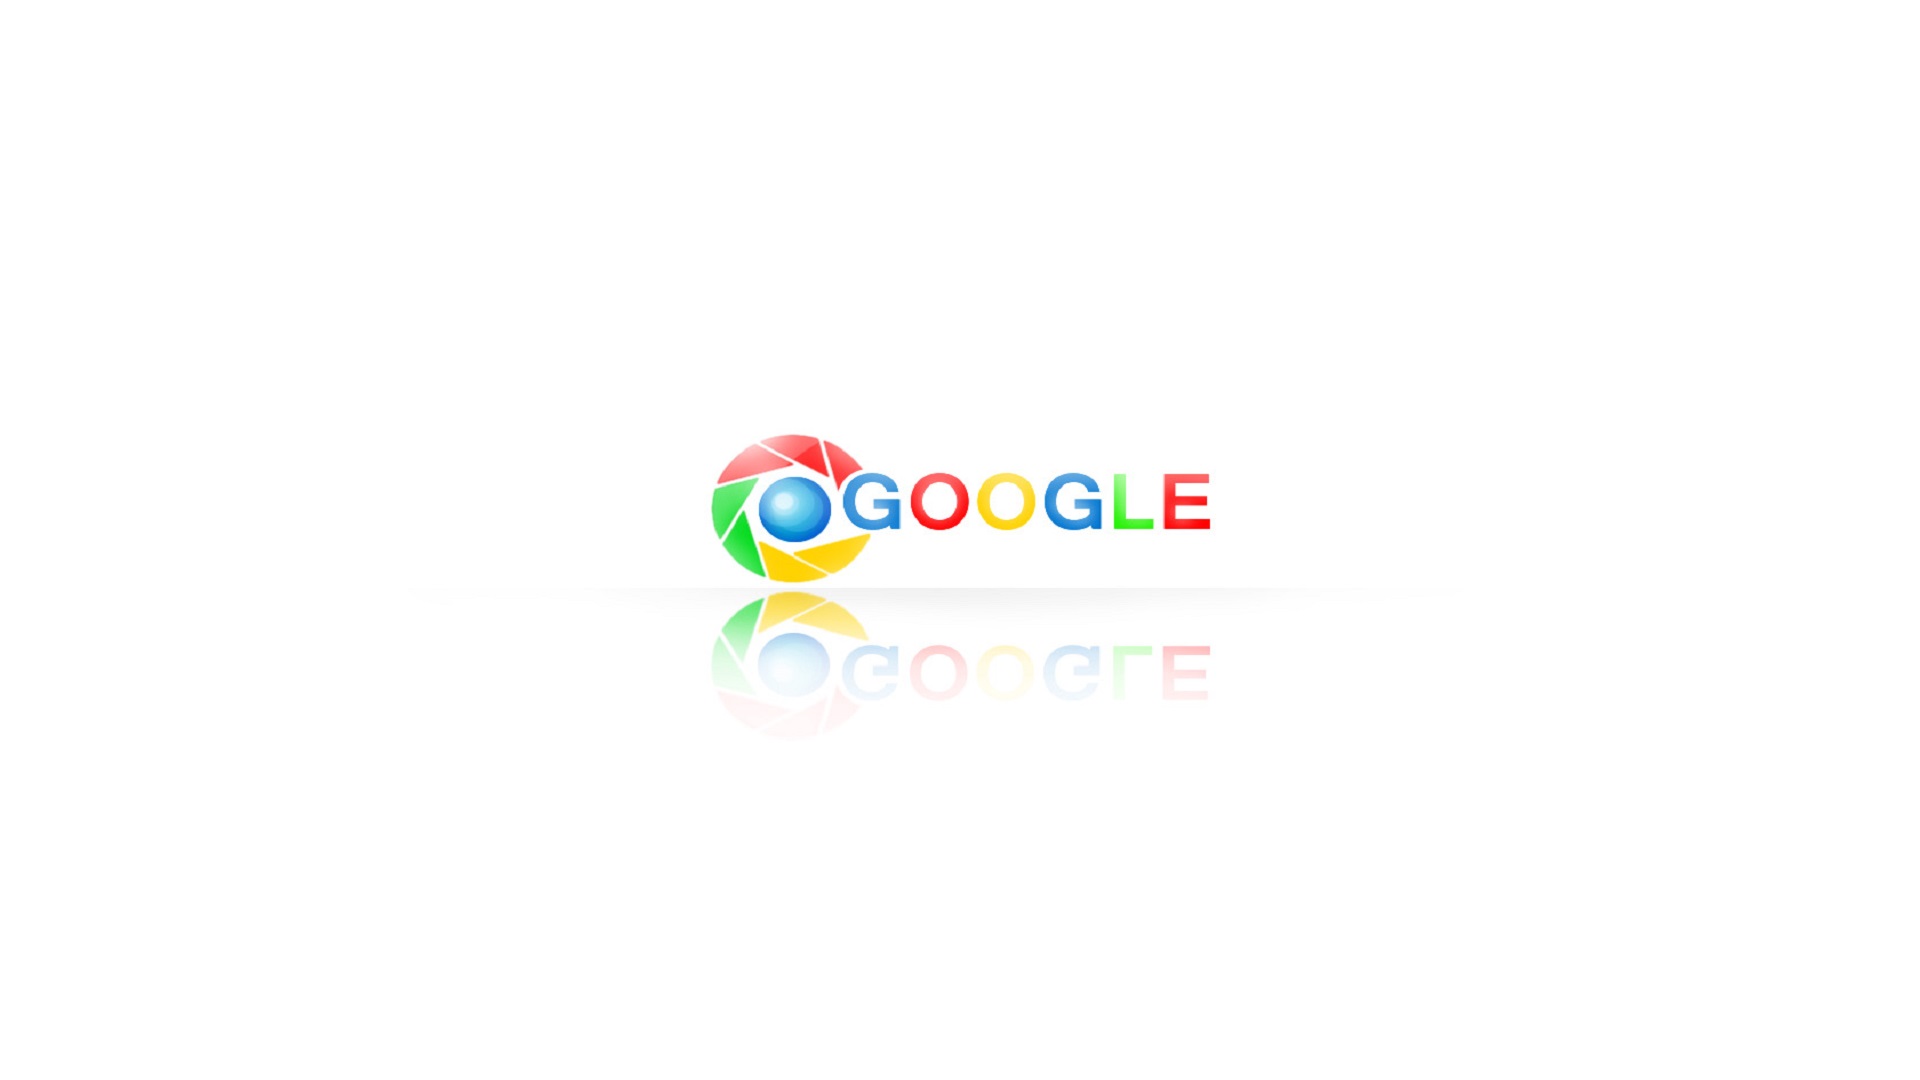 History Of Google HD Wallpaper For Desktop Background Pictureicon